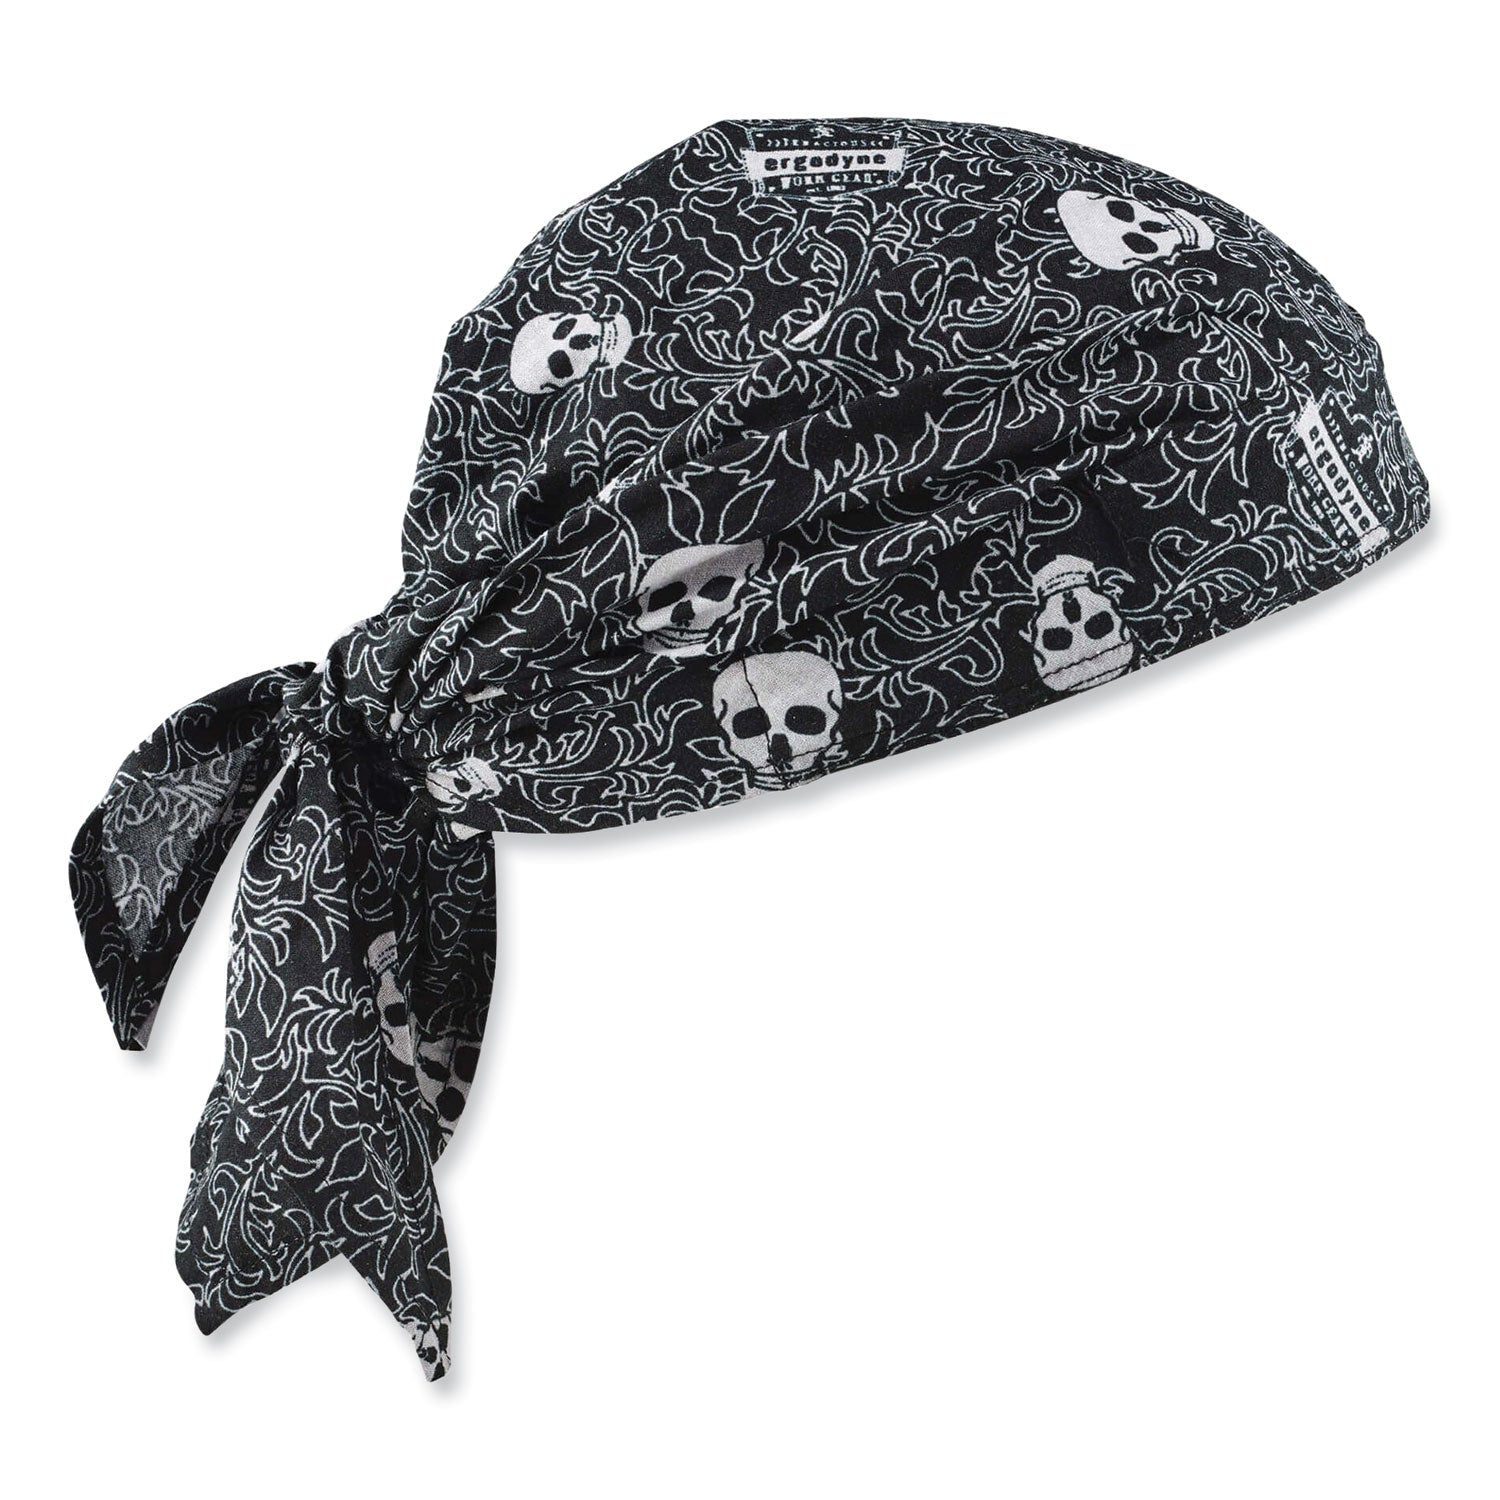 chill-its-6710-cooling-embedded-polymers-tie-bandana-triangle-hat-one-size-fits-most-skulls-ships-in-1-3-business-days_ego12359 - 1